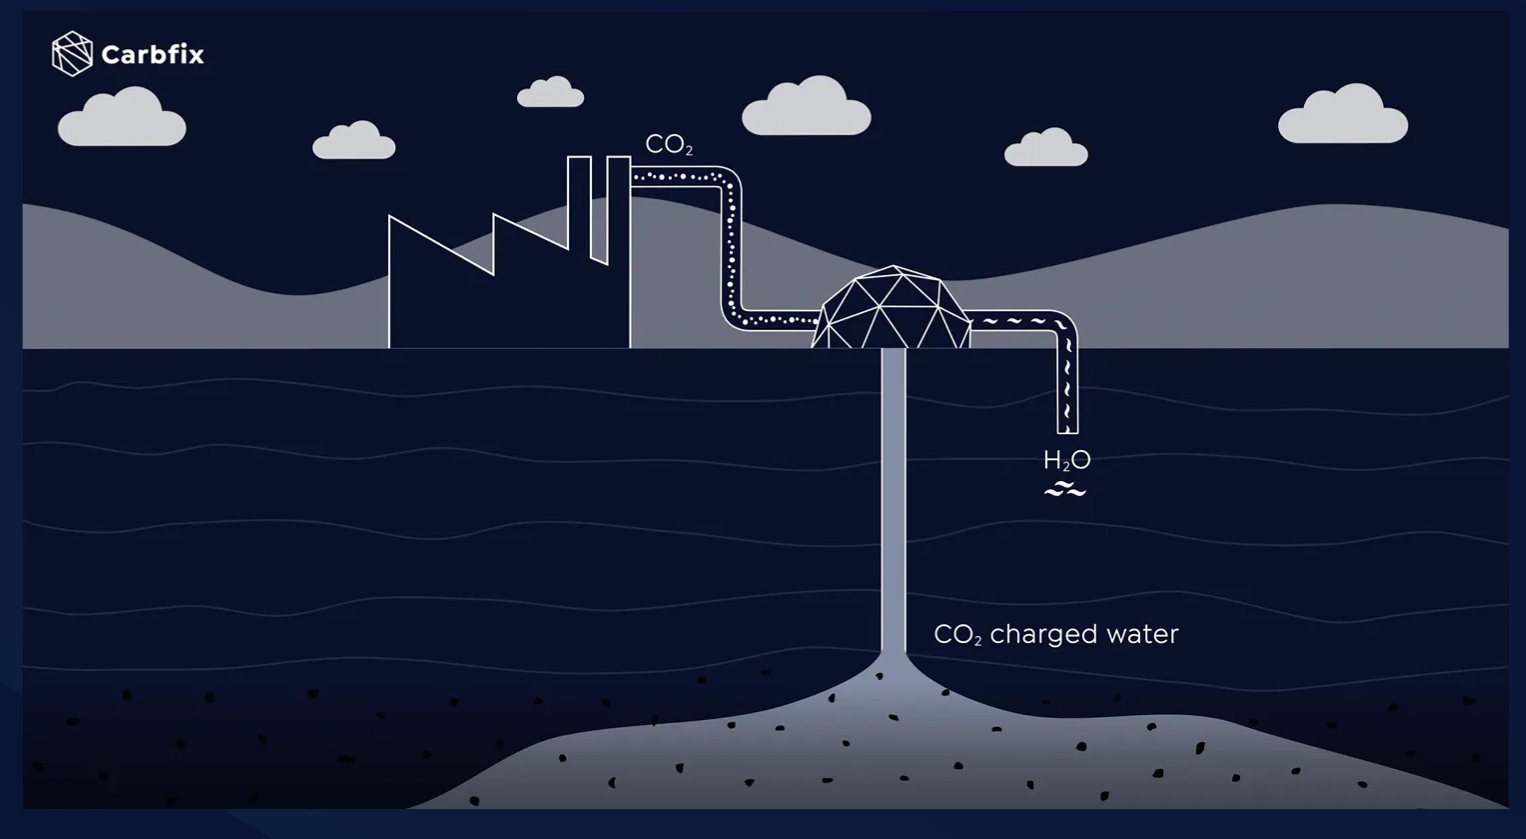 An illustration of how CO2 to CO2 charged water underground takes place